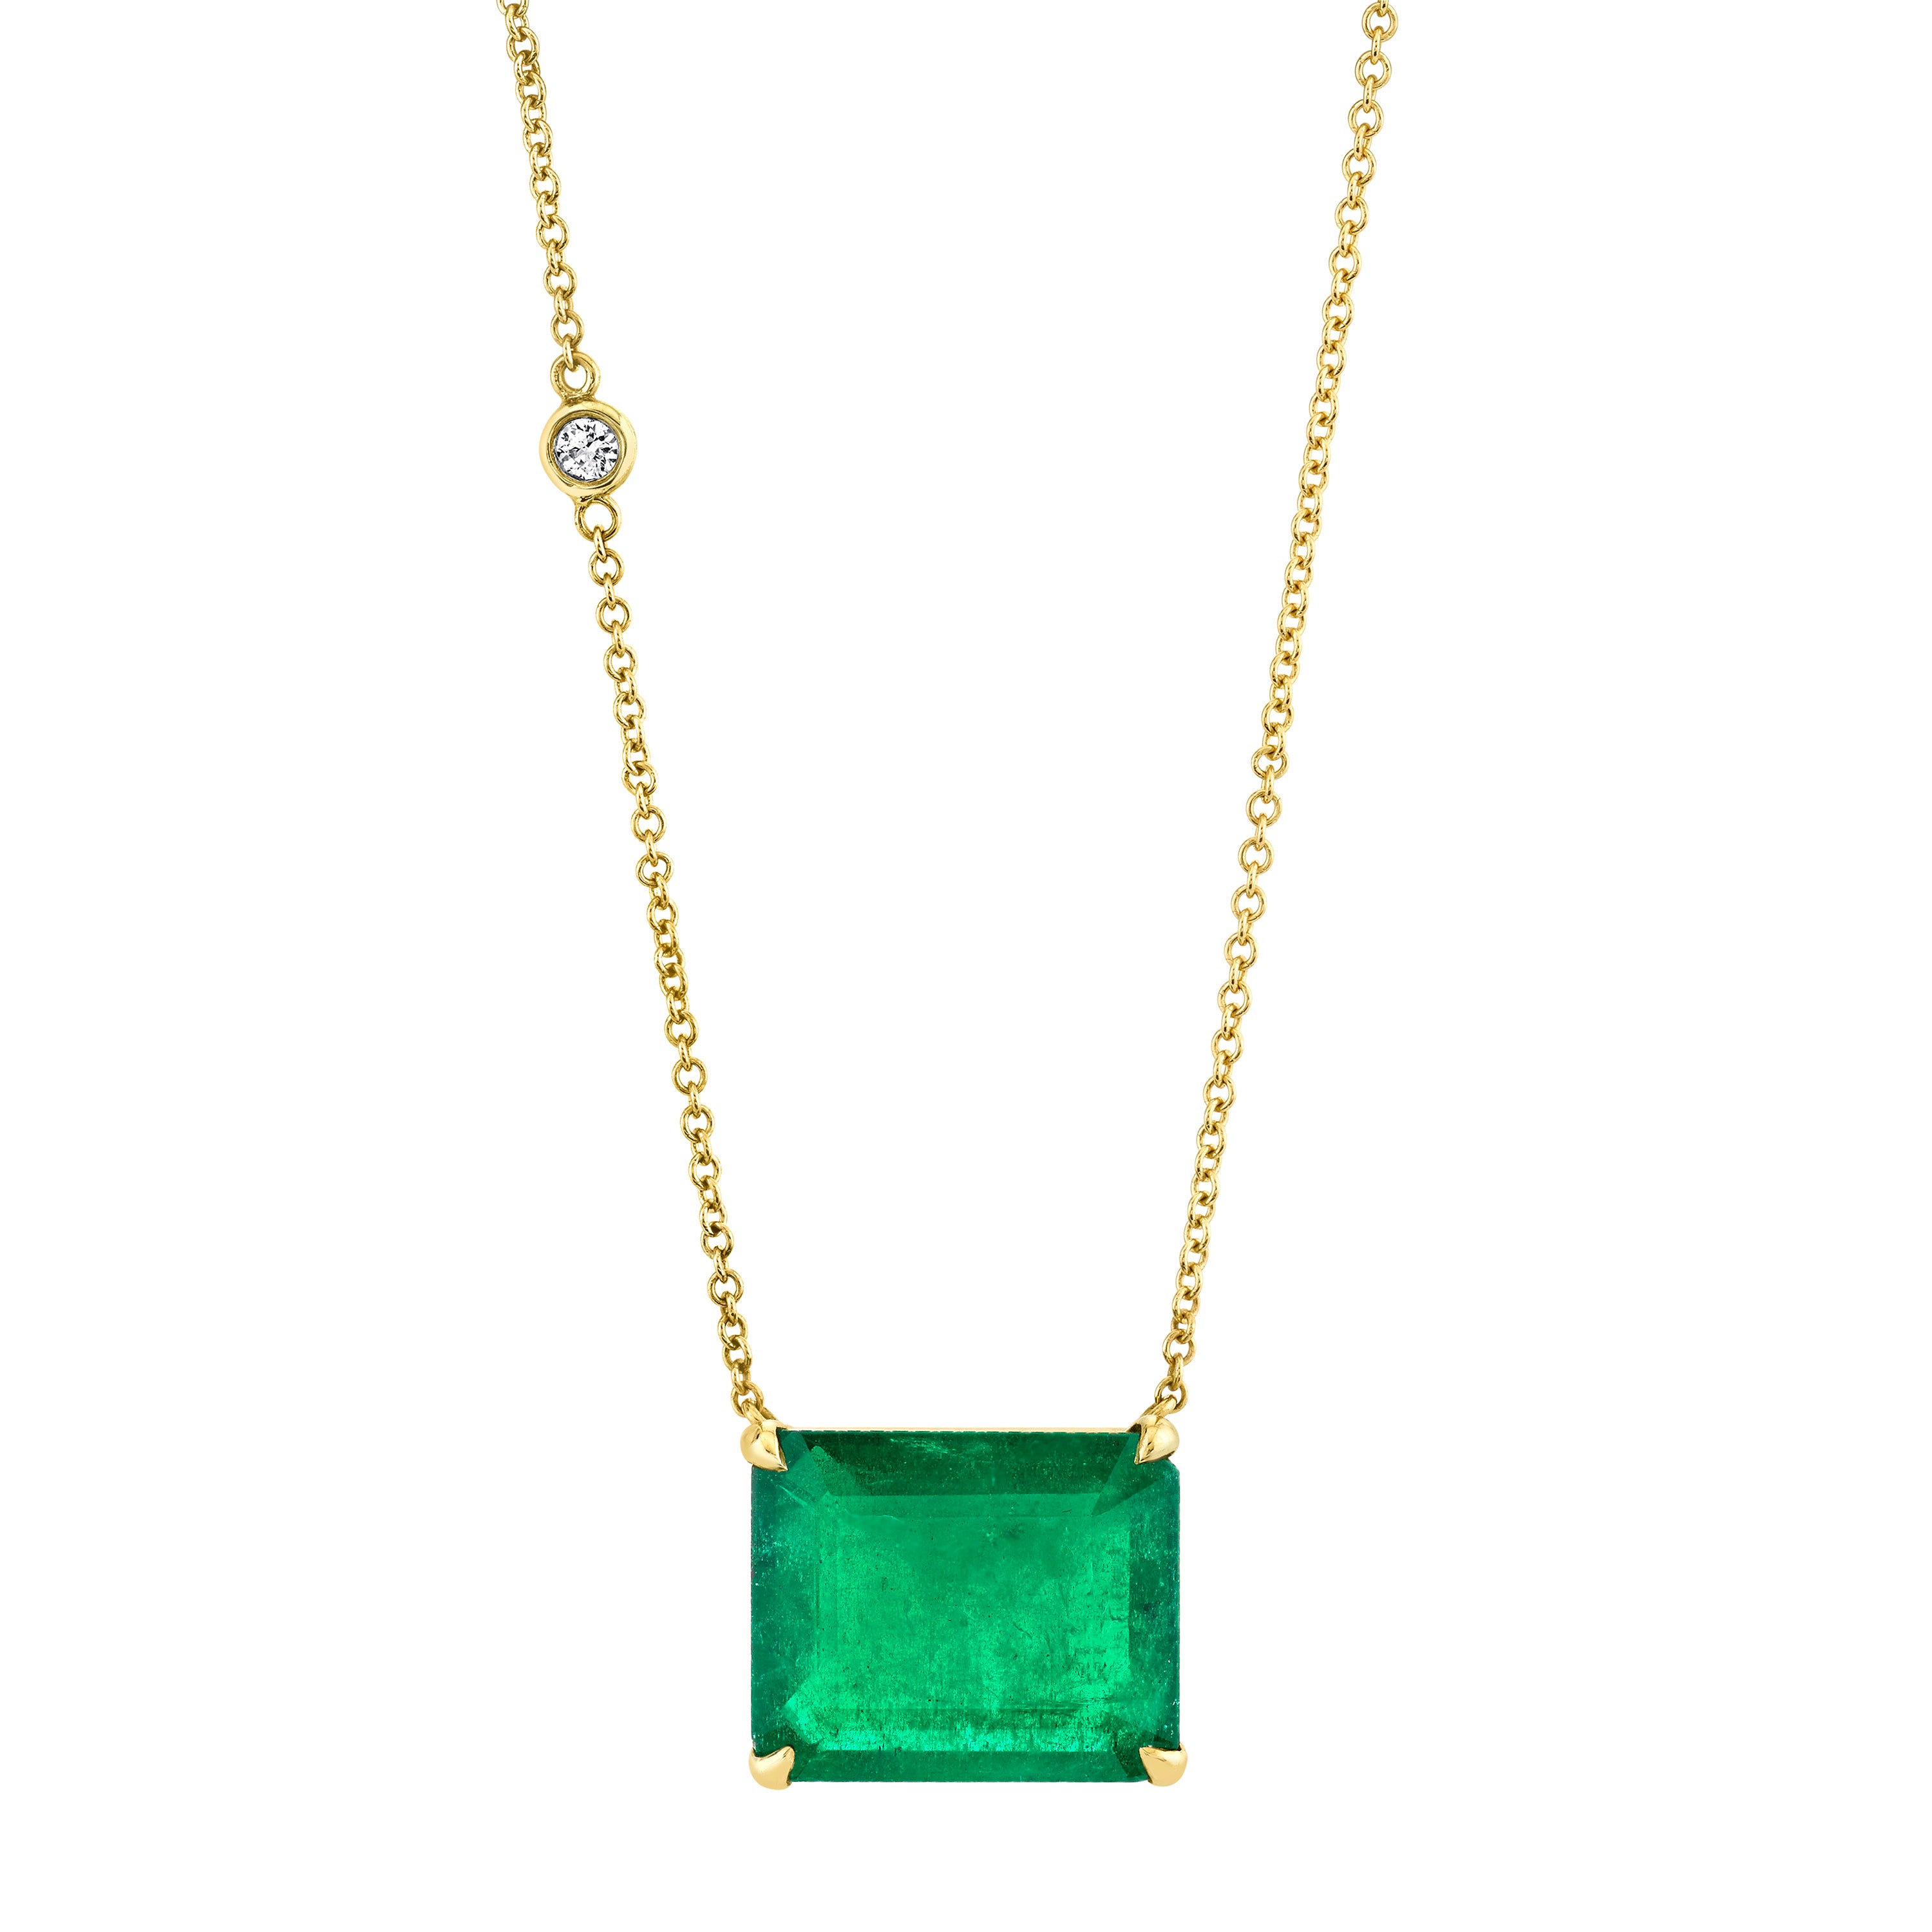 Amazon.com: Double layered Halo Emerald Necklace - Rose gold coated  Sterling Silver - 8 MM 2.1 Ct Solitaire Green Heart Emerald Pendant Jewelry  Adjustable Chain : Handmade Products